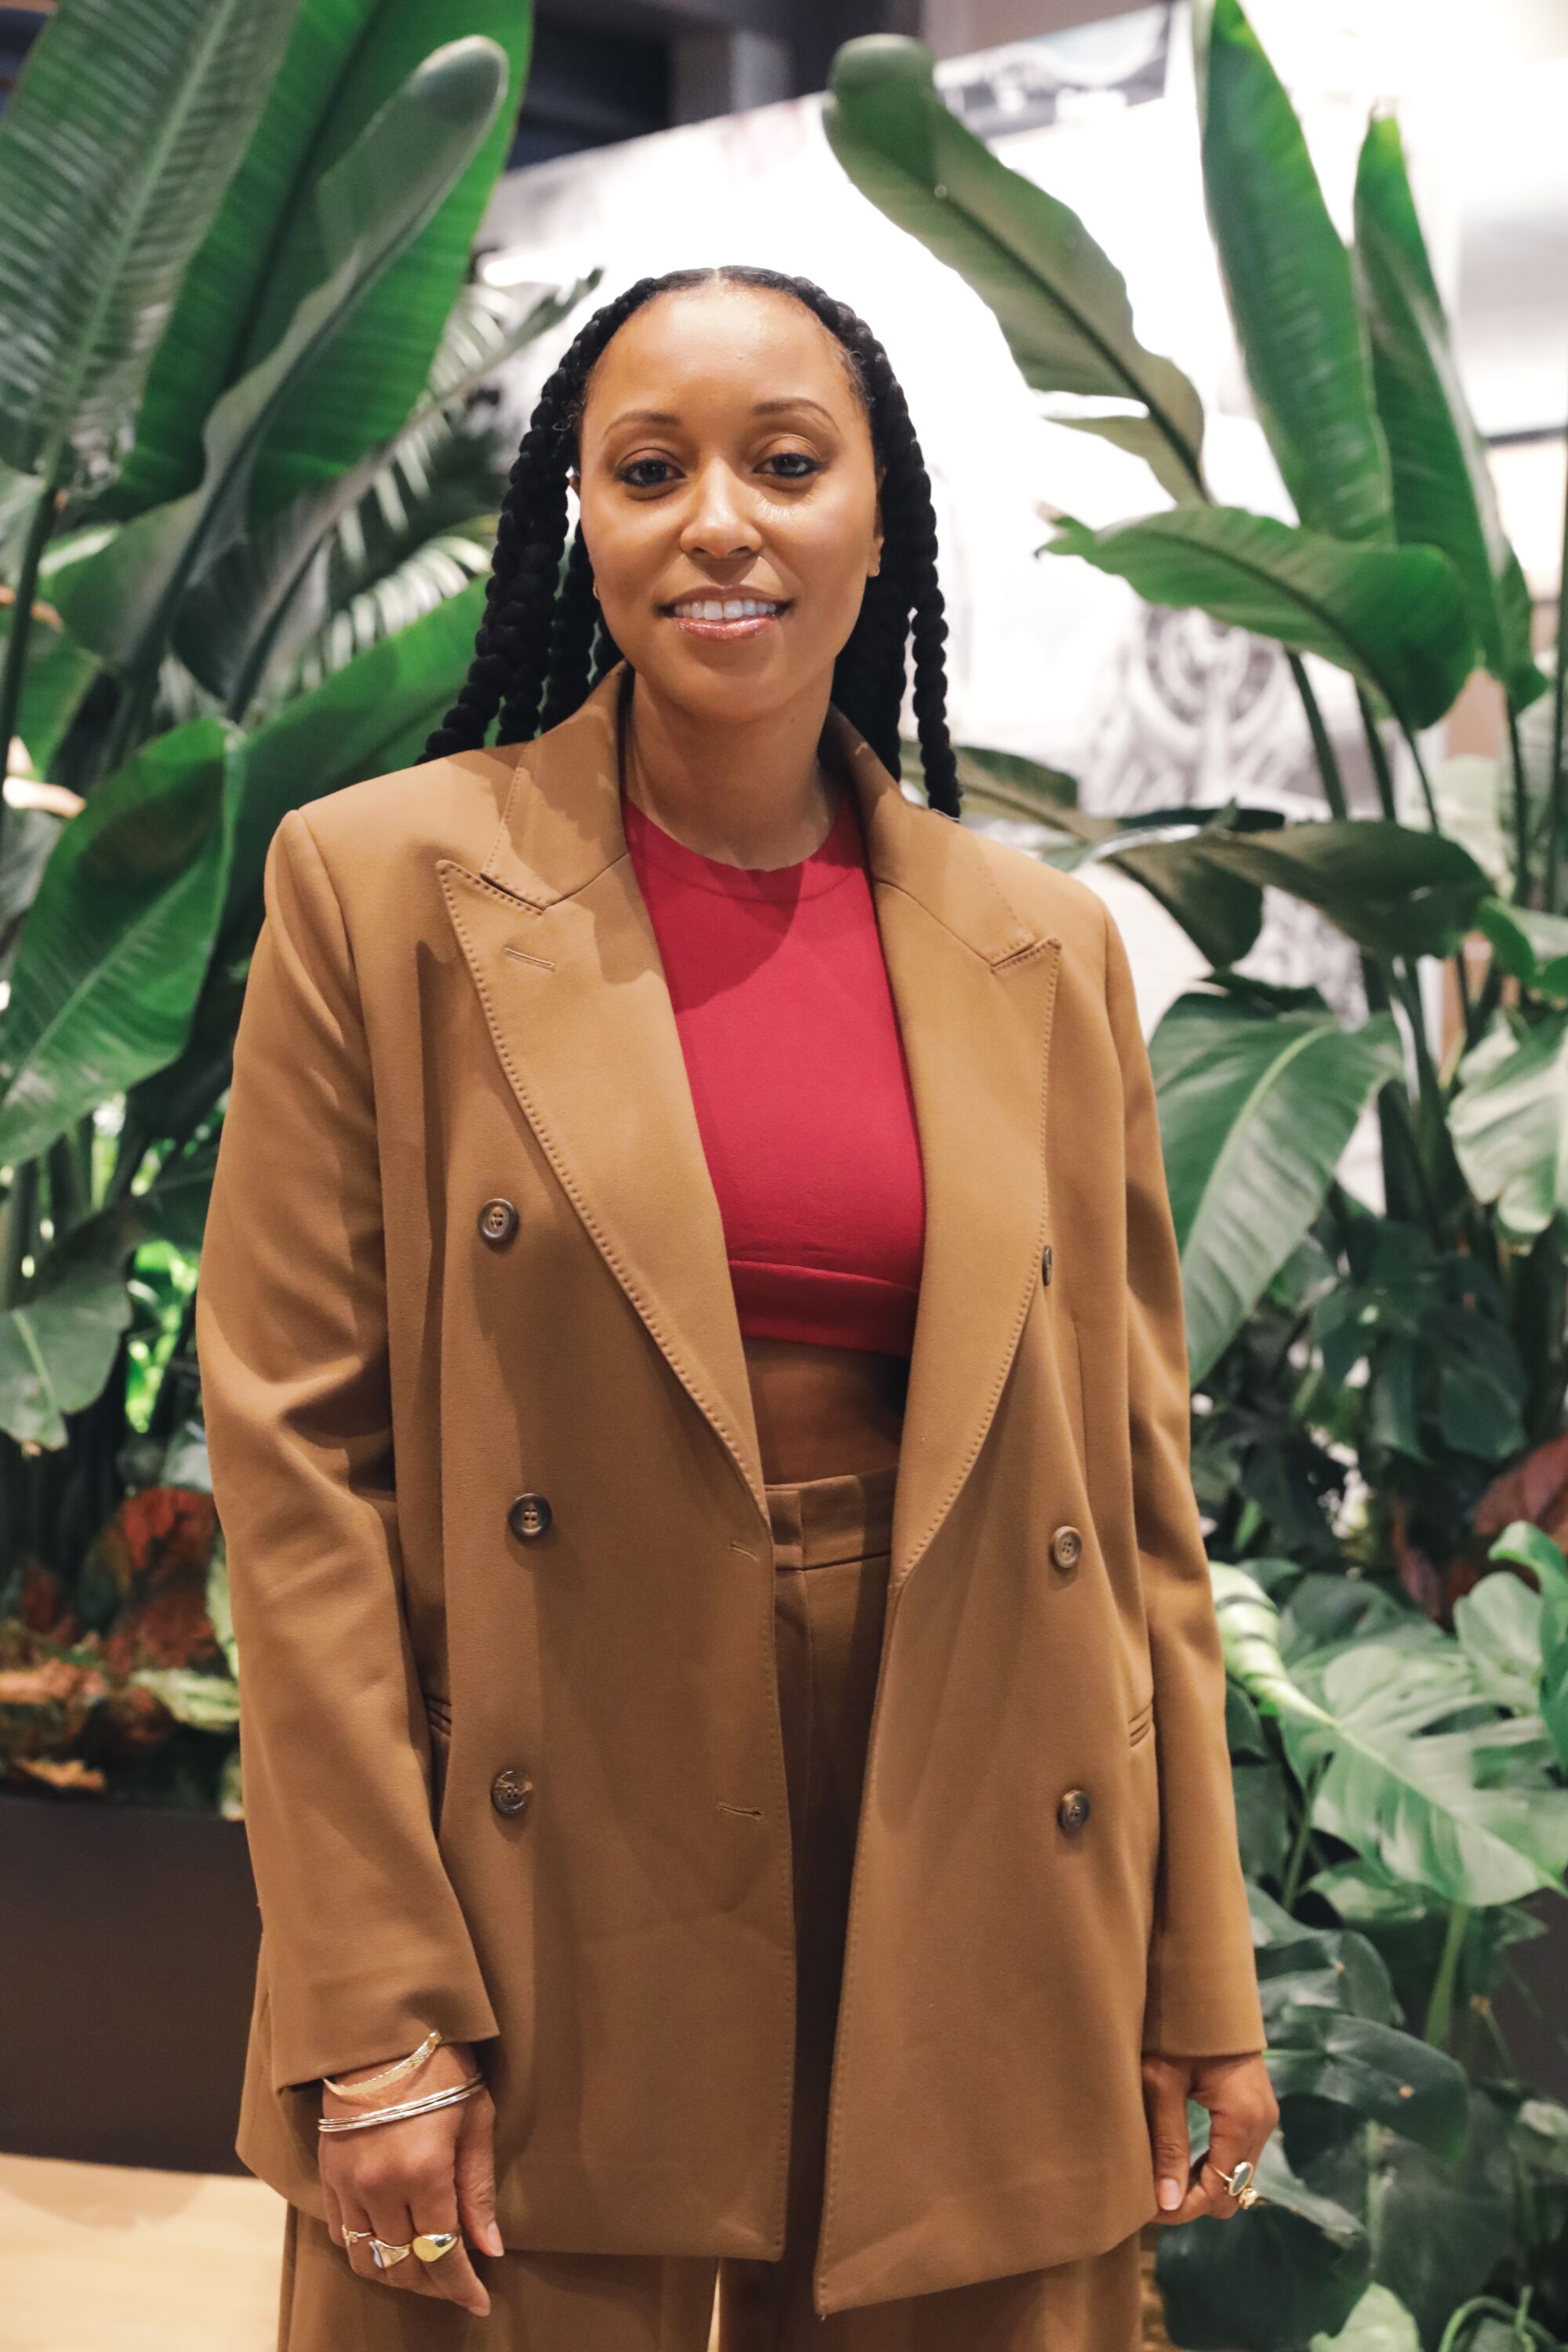 Black woman in a light brown pant suit smiles and poses in front of plants 